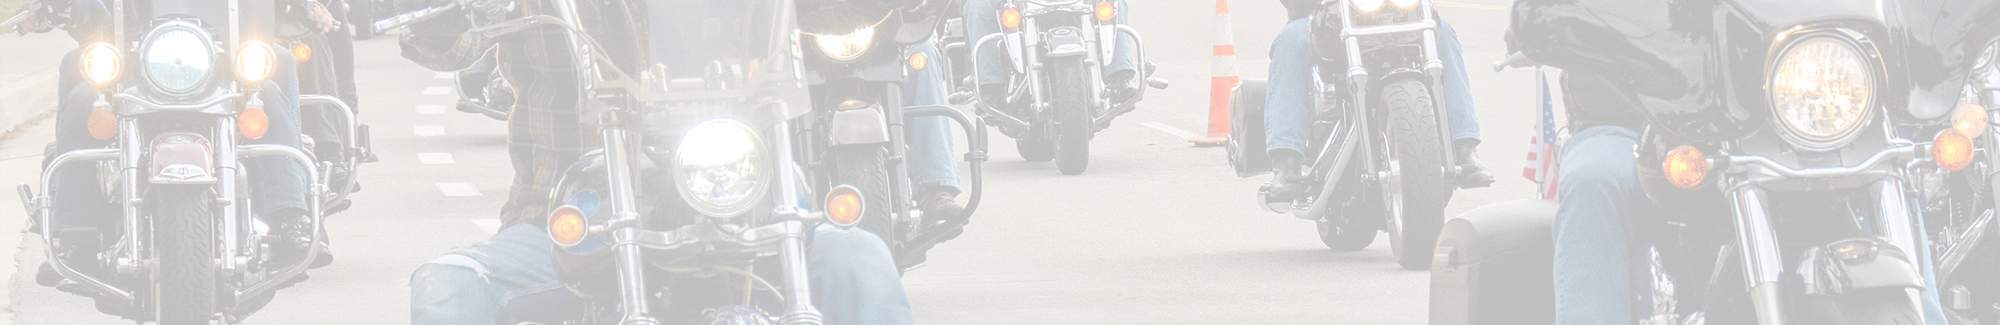 Milwaukee motorcycle accident attorneys - no win no fee